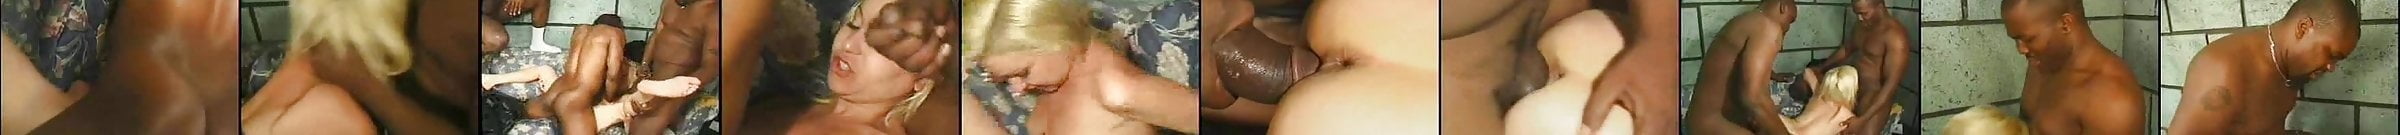 Featured Black Whores Porn Videos Xhamster